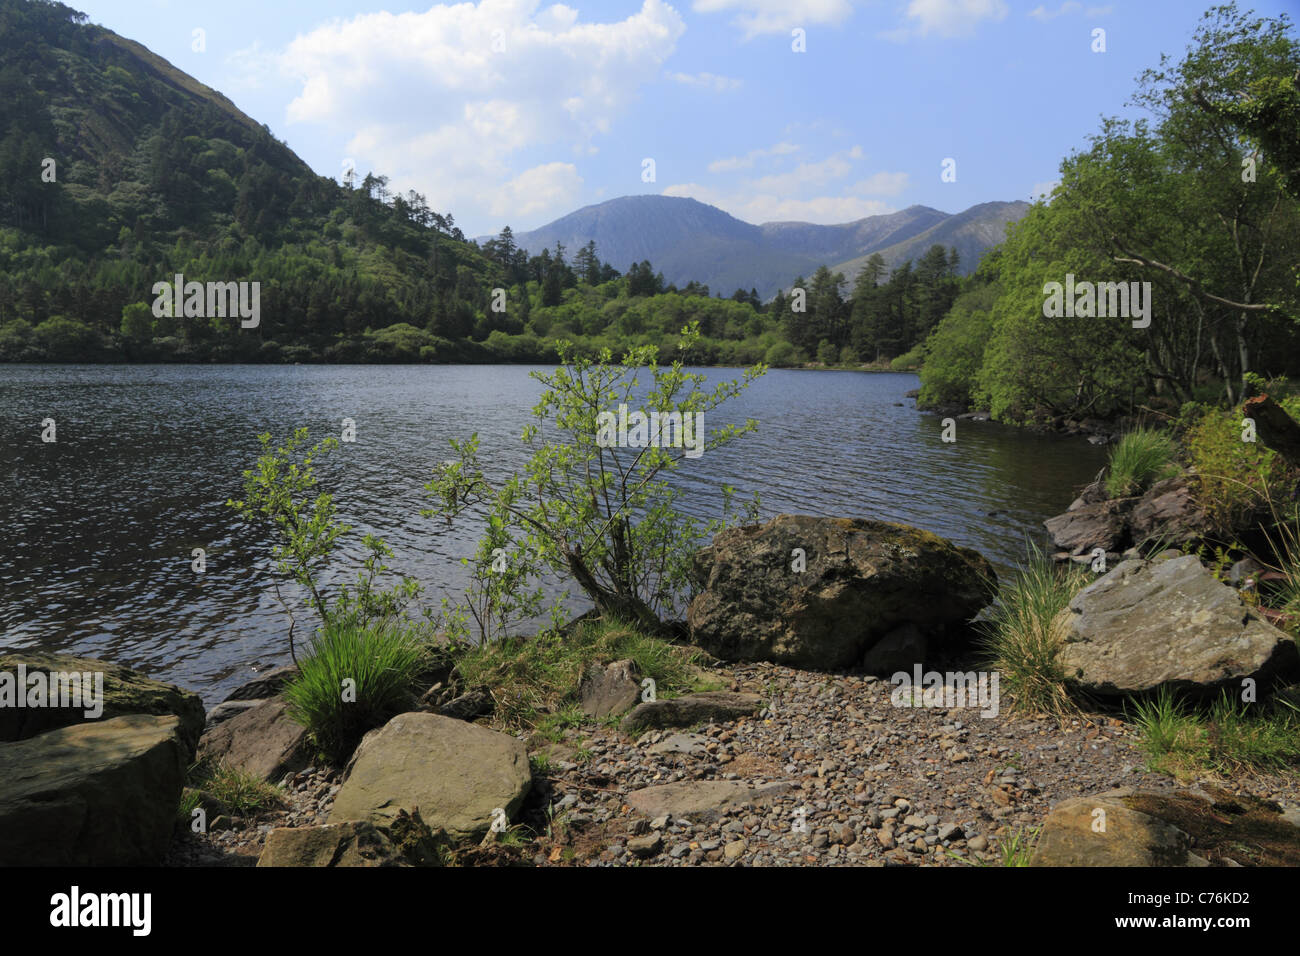 A view across Glanmore Lake to the mountains of the Beara Peninsula, Co Kerry, Rep of Ireland. Stock Photo